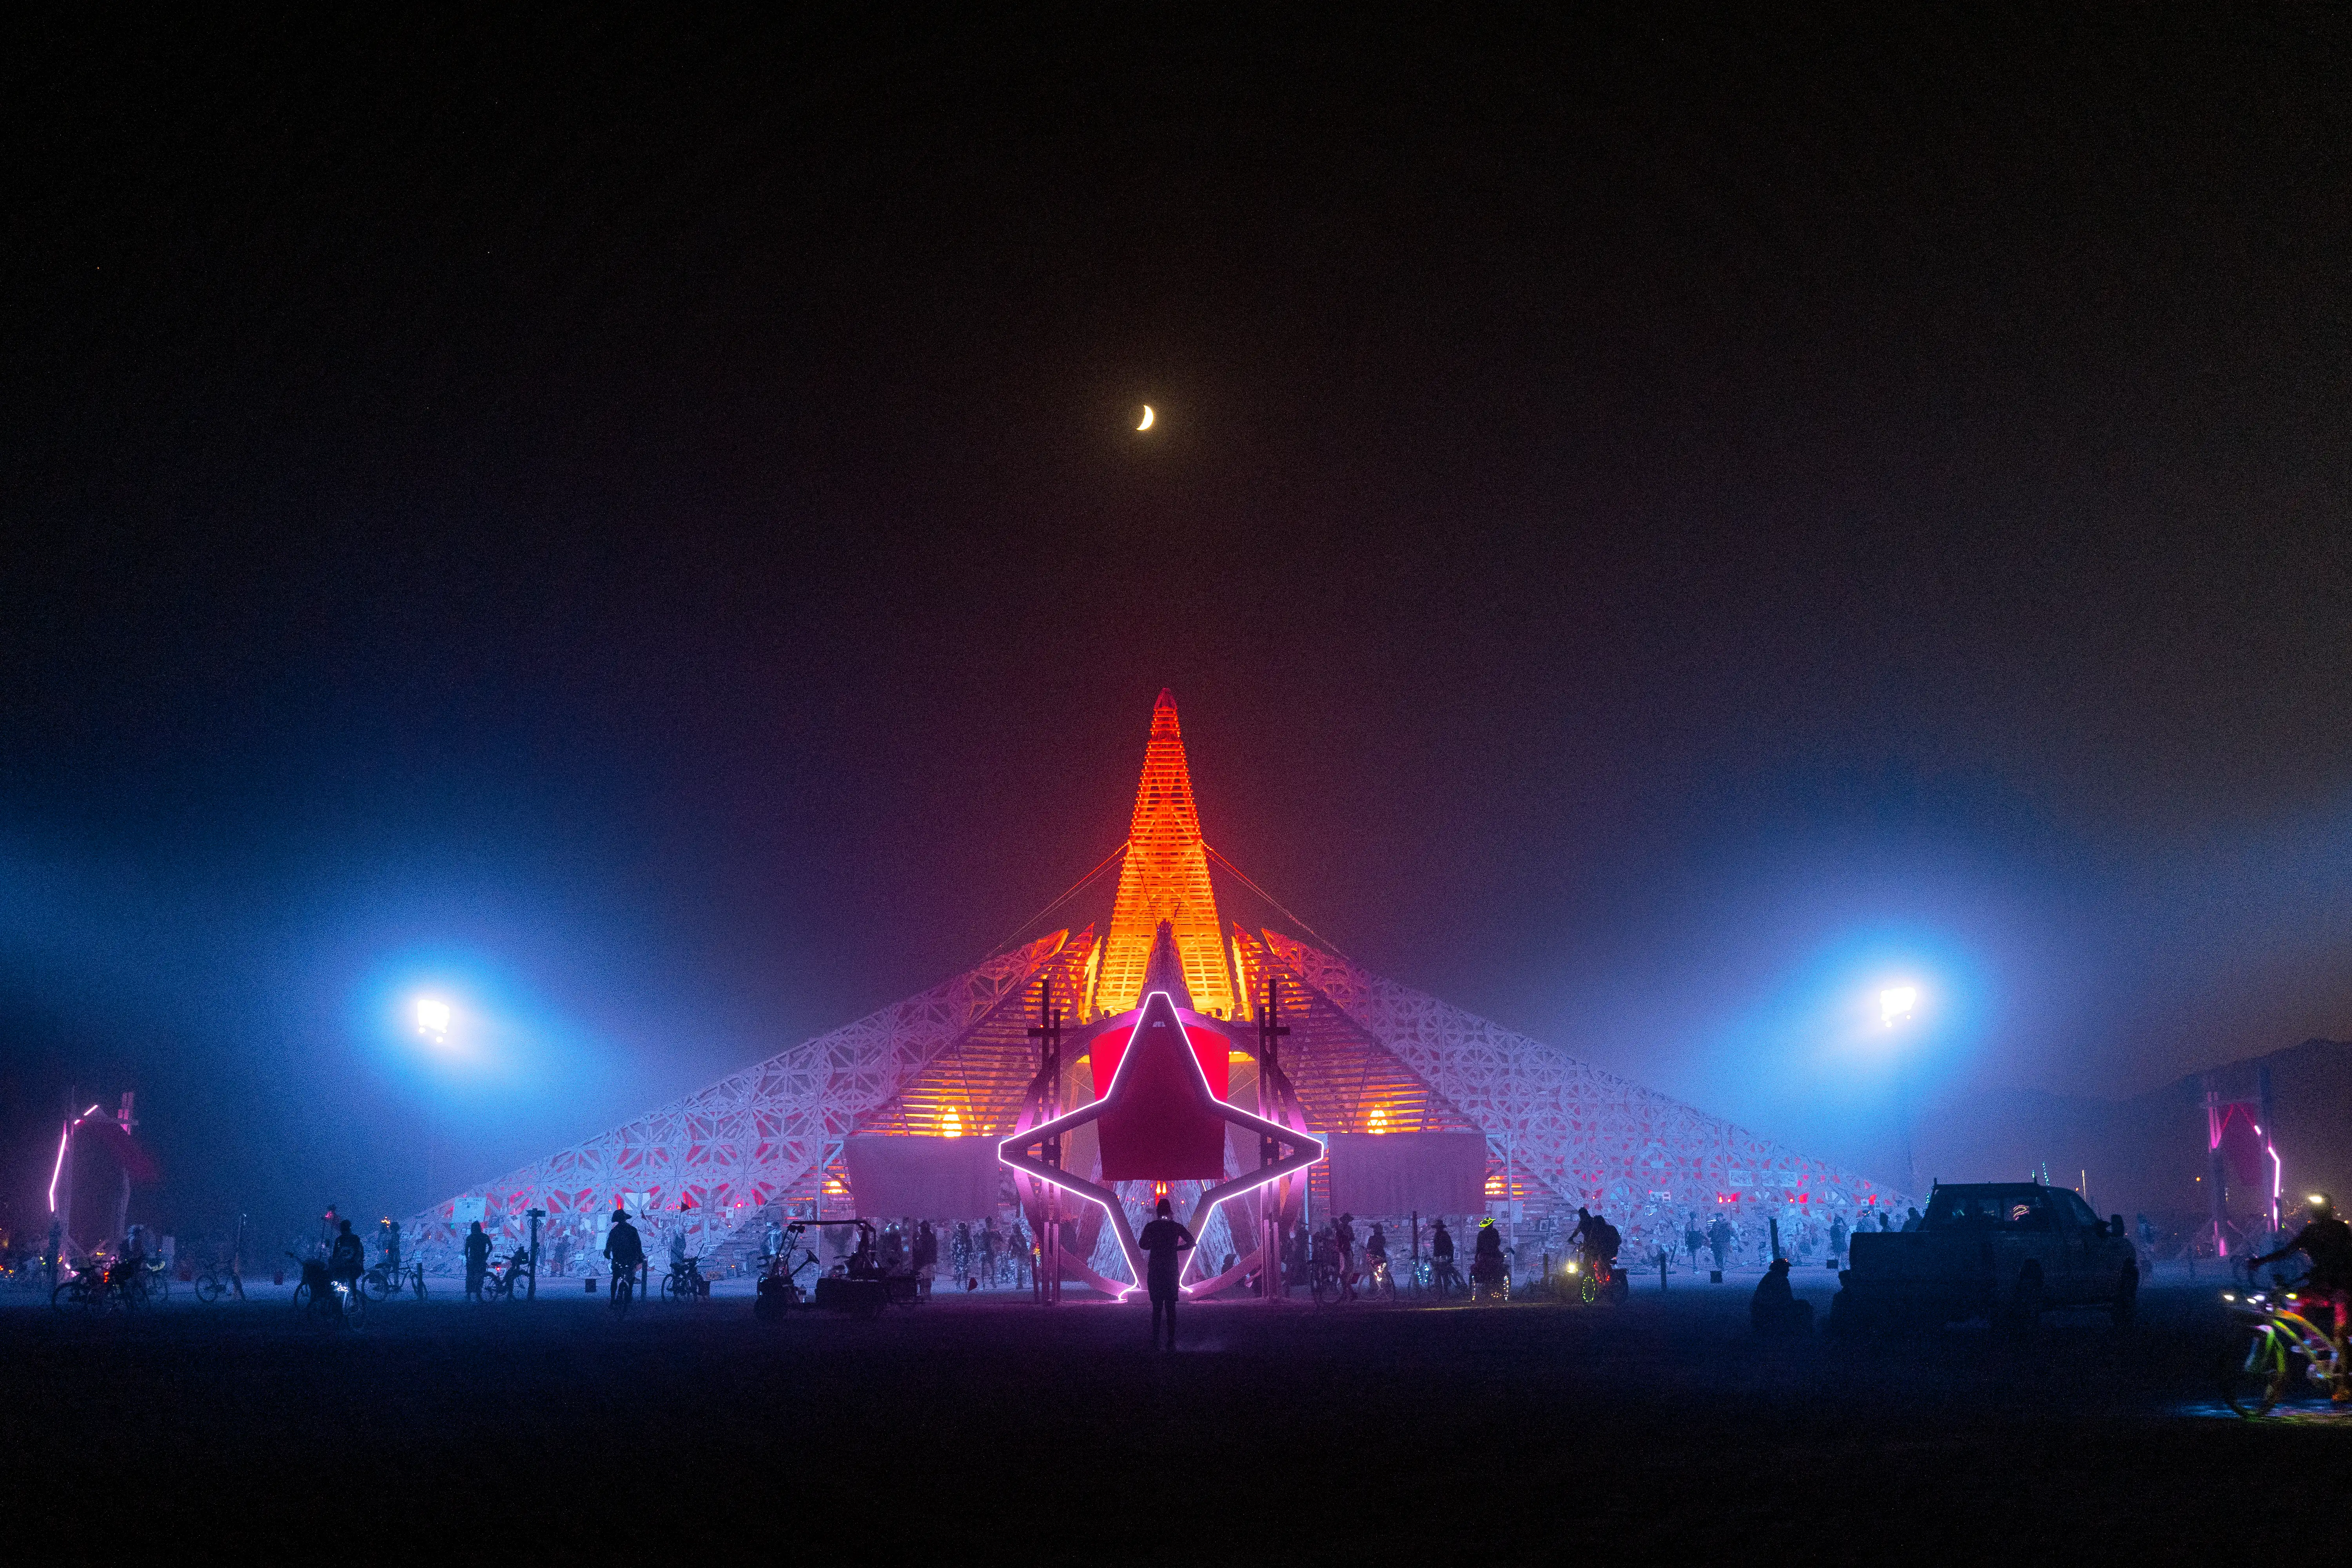 The Empyrean Temple at night, lit up dramatically. A portal in front of the temple is in the shape of a four-sided star, with a circular portal behind it. The temple is roughly pyramid shaped, with a steeper pointy tower in the center, made out of wood cut into delicate, abstract geometric patterns. The moon shines above, and burners on foot and on bicycles are seen around.